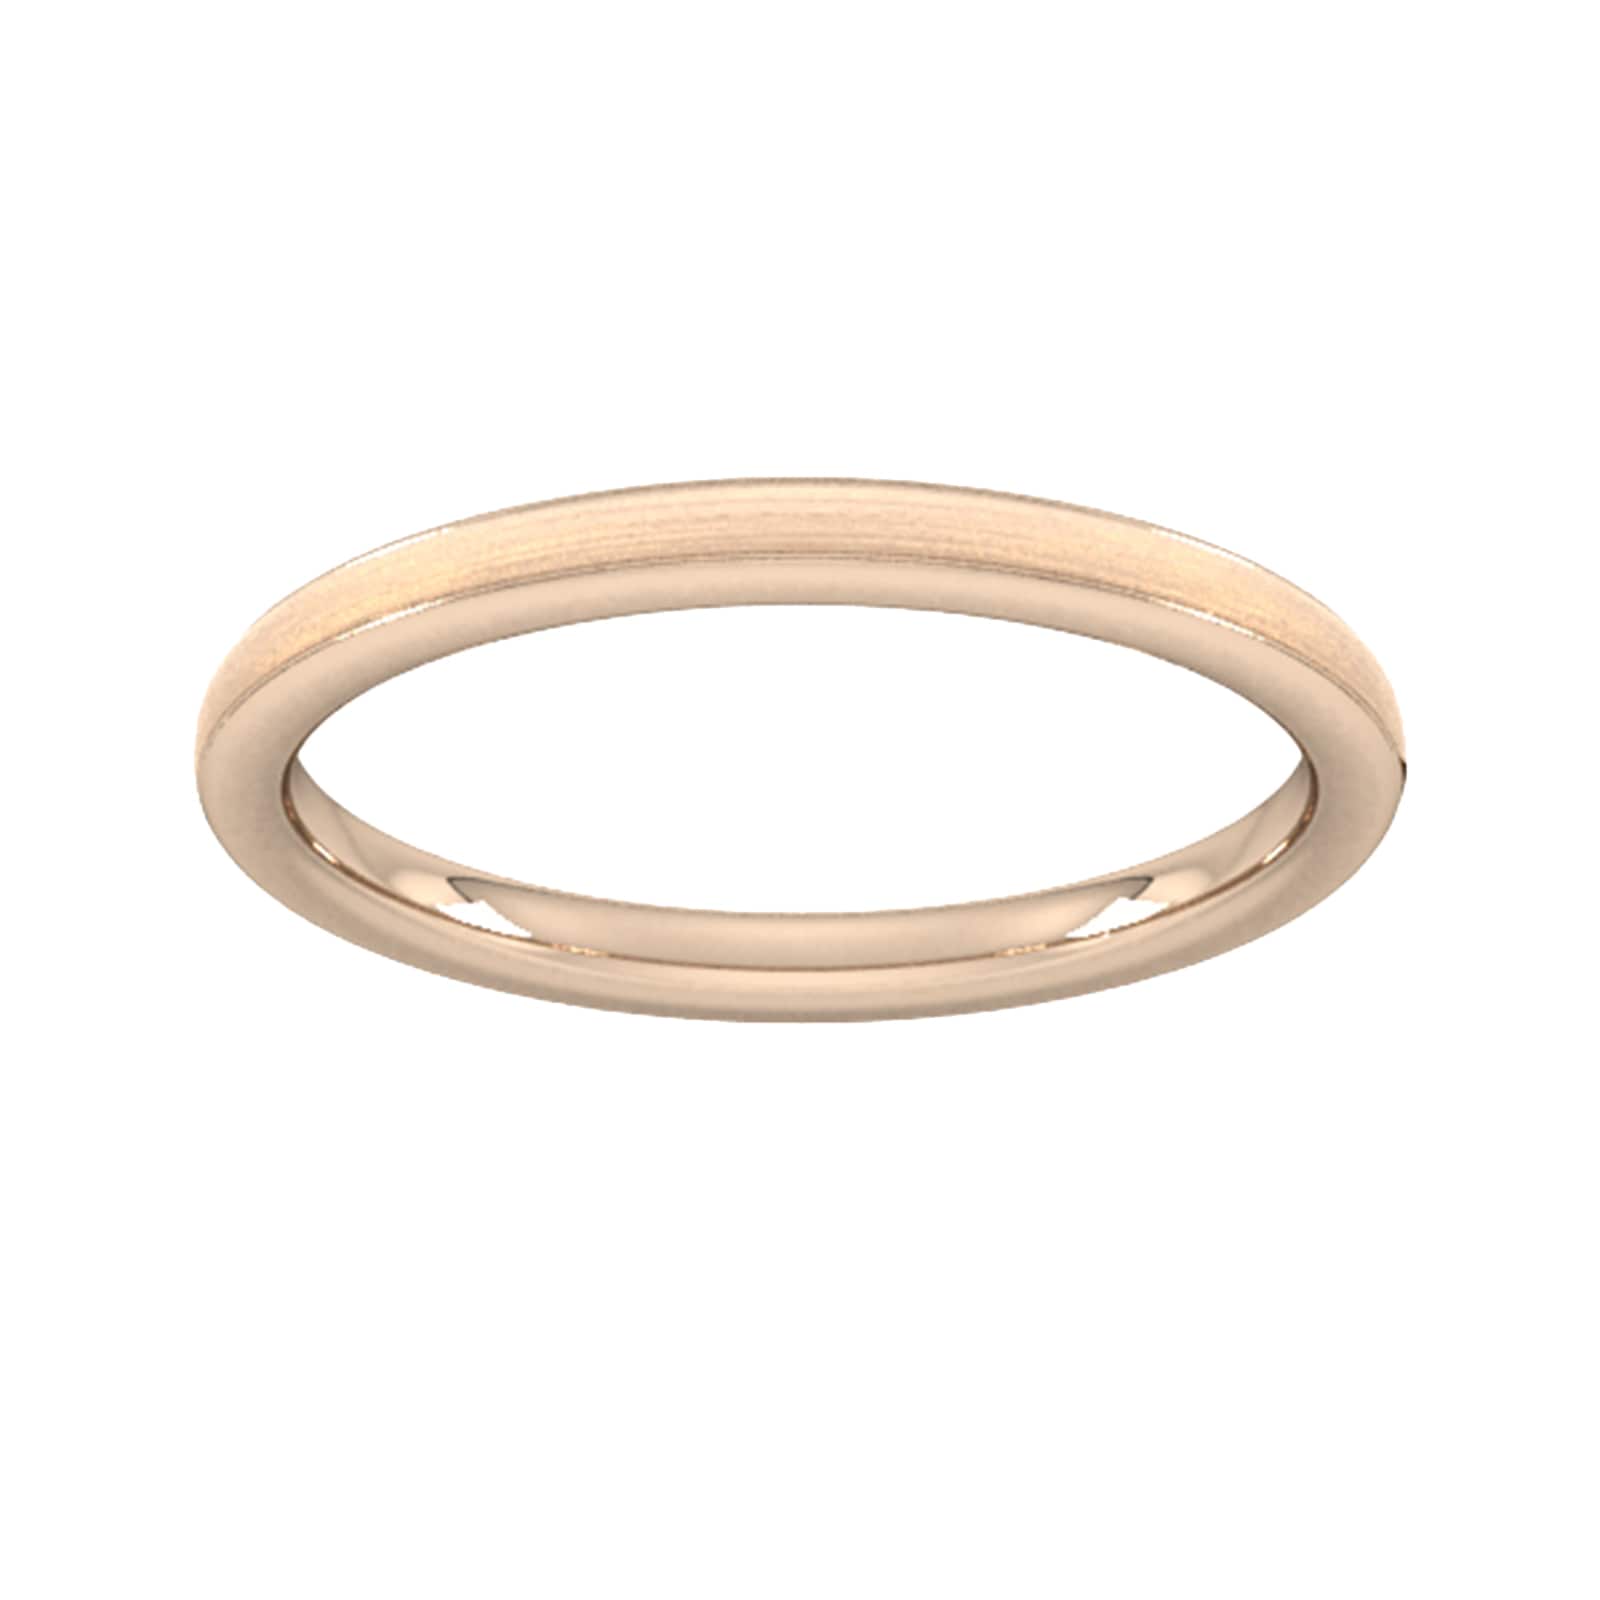 2mm Slight Court Extra Heavy Matt Centre With Grooves Wedding Ring In 18 Carat Rose Gold - Ring Size W